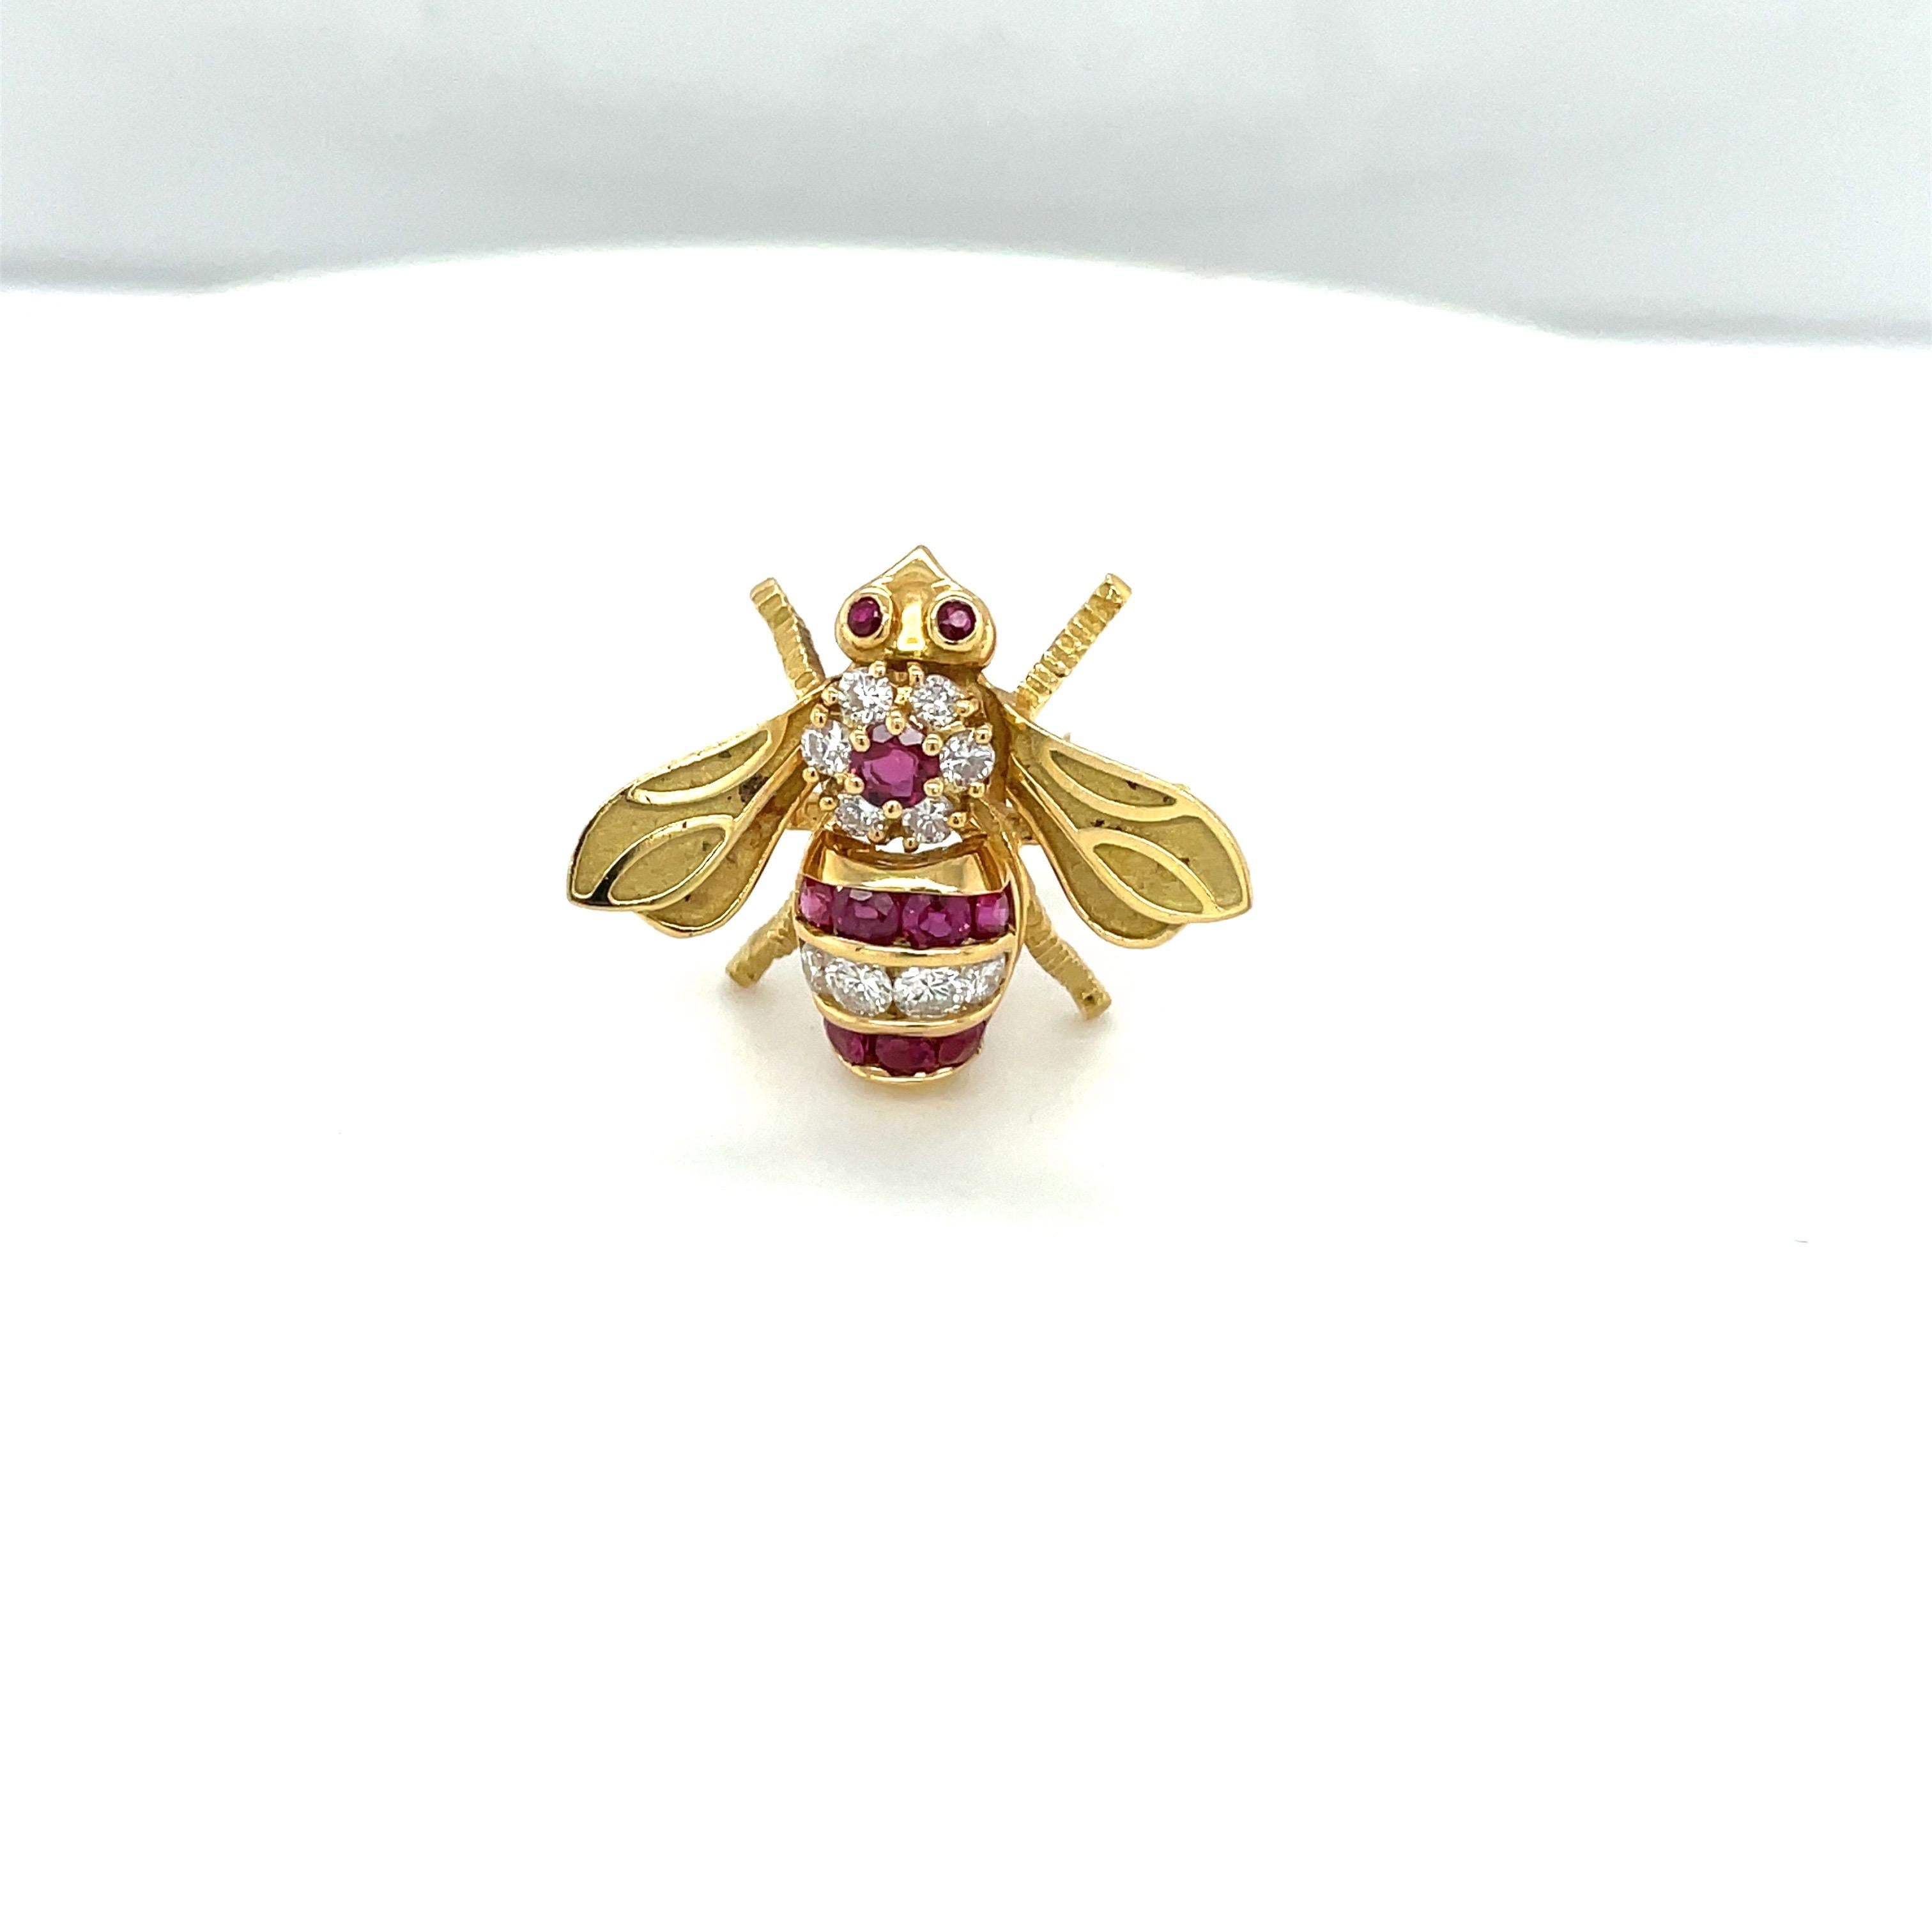 Classic 18 karat yellow gold bee brooch. This little bee is beautifully set with round brilliant diamonds and rubies. The wings are finished in a matte gold with shiny detail. The bee measures approximately 1/2